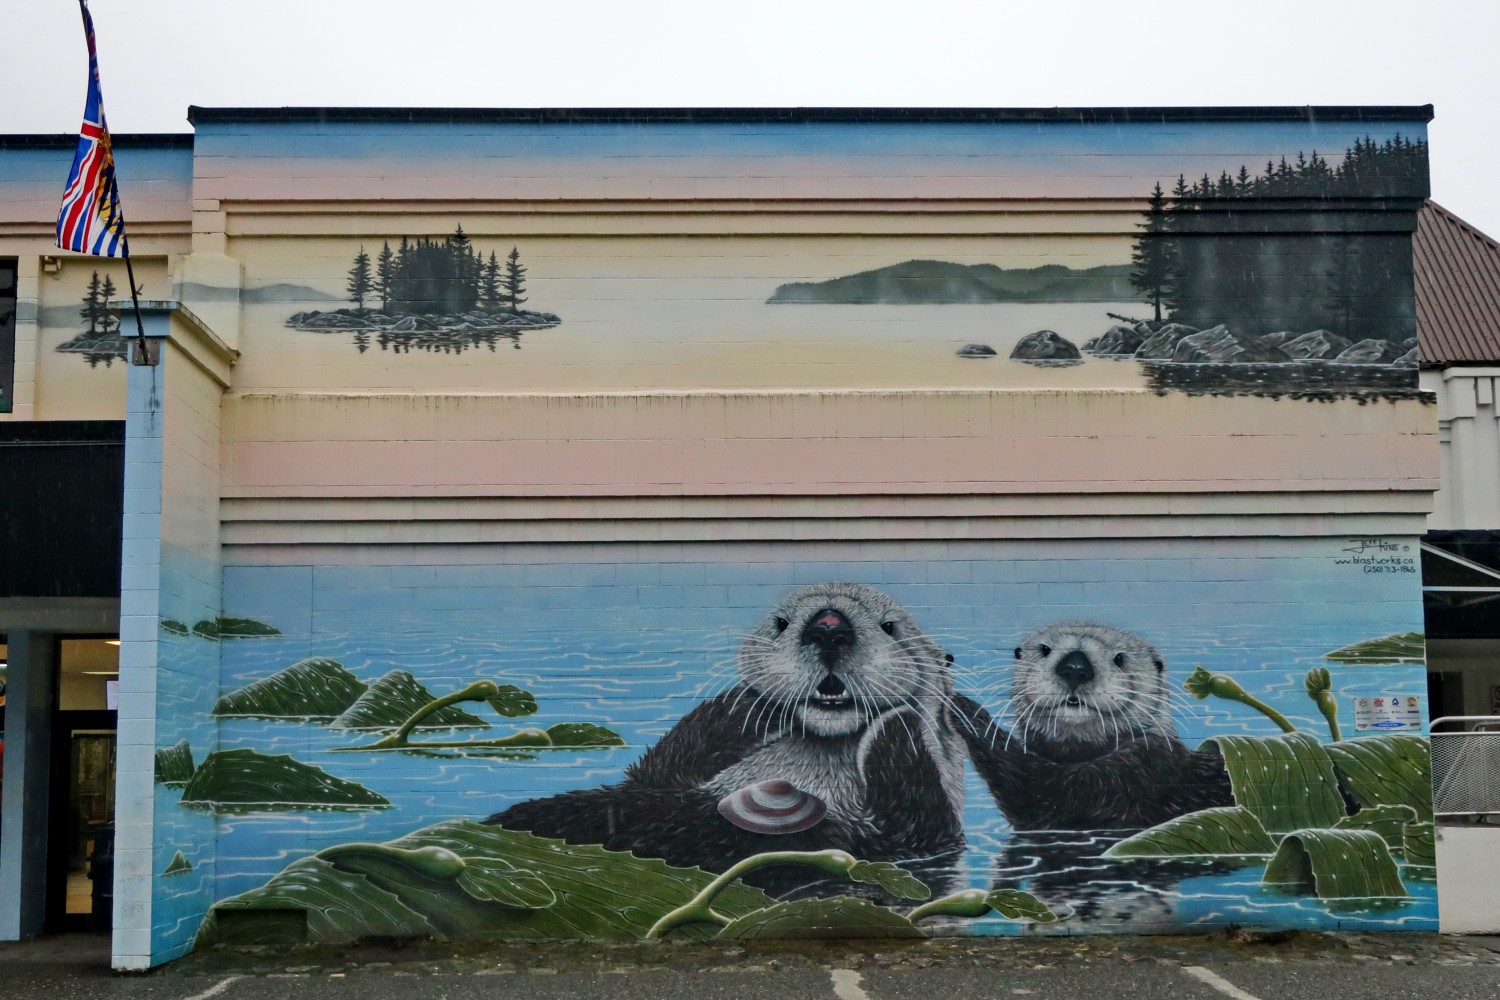 Sea Otters on the wall of the Civic Center of Prince Rupert